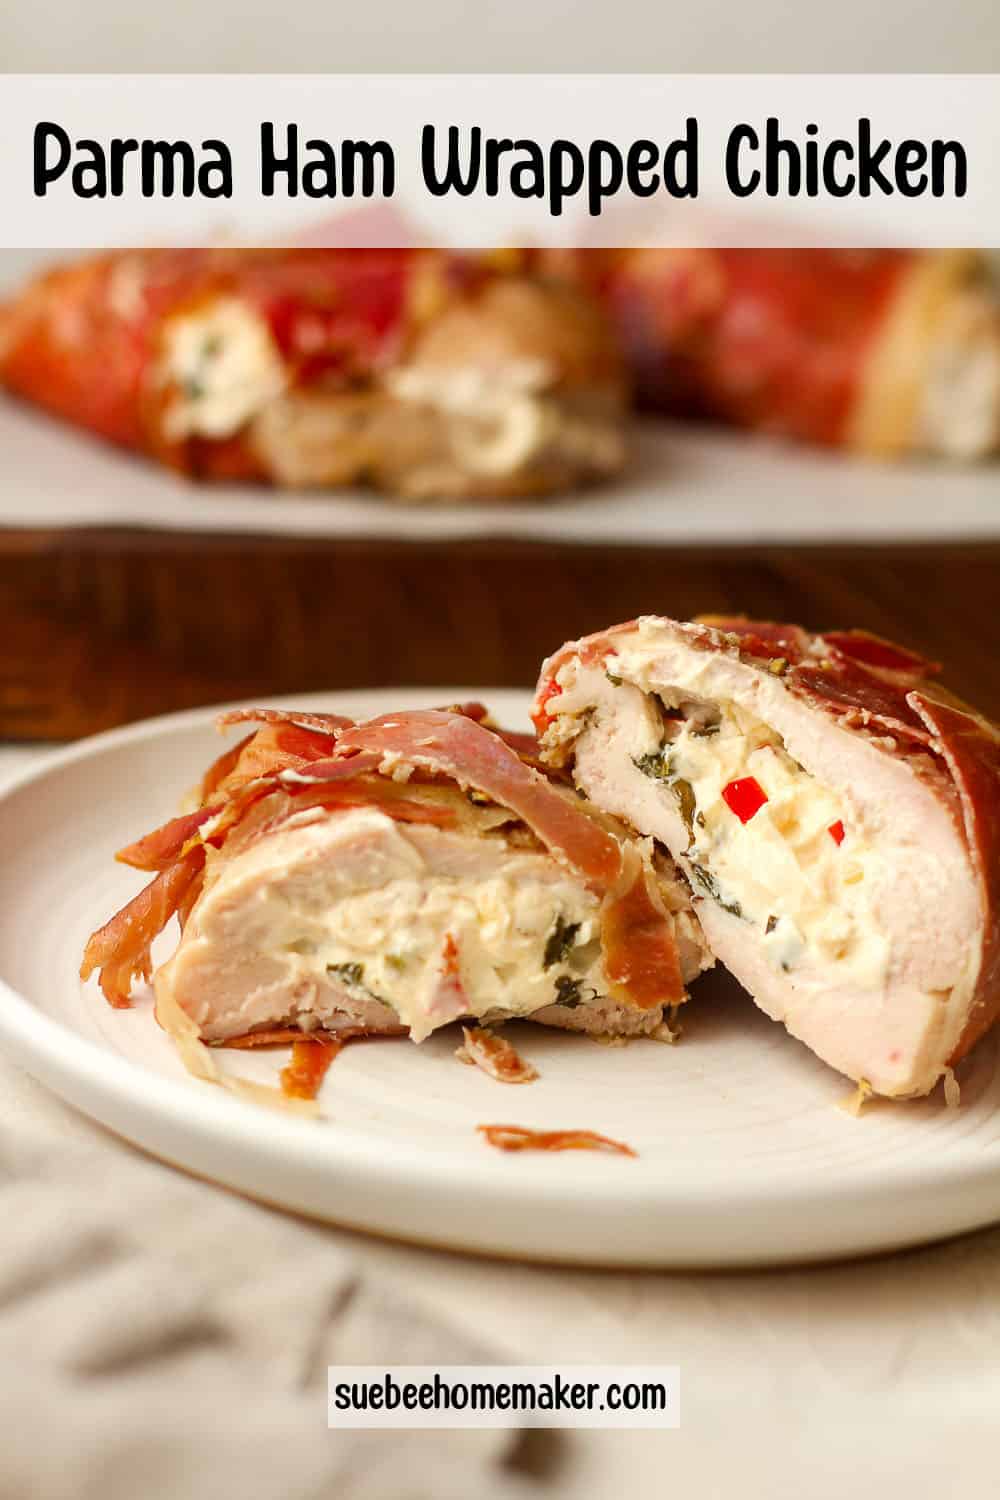 Side view of a plate of a halved goat cheese stuffed chicken breast wrapped in parma ham.